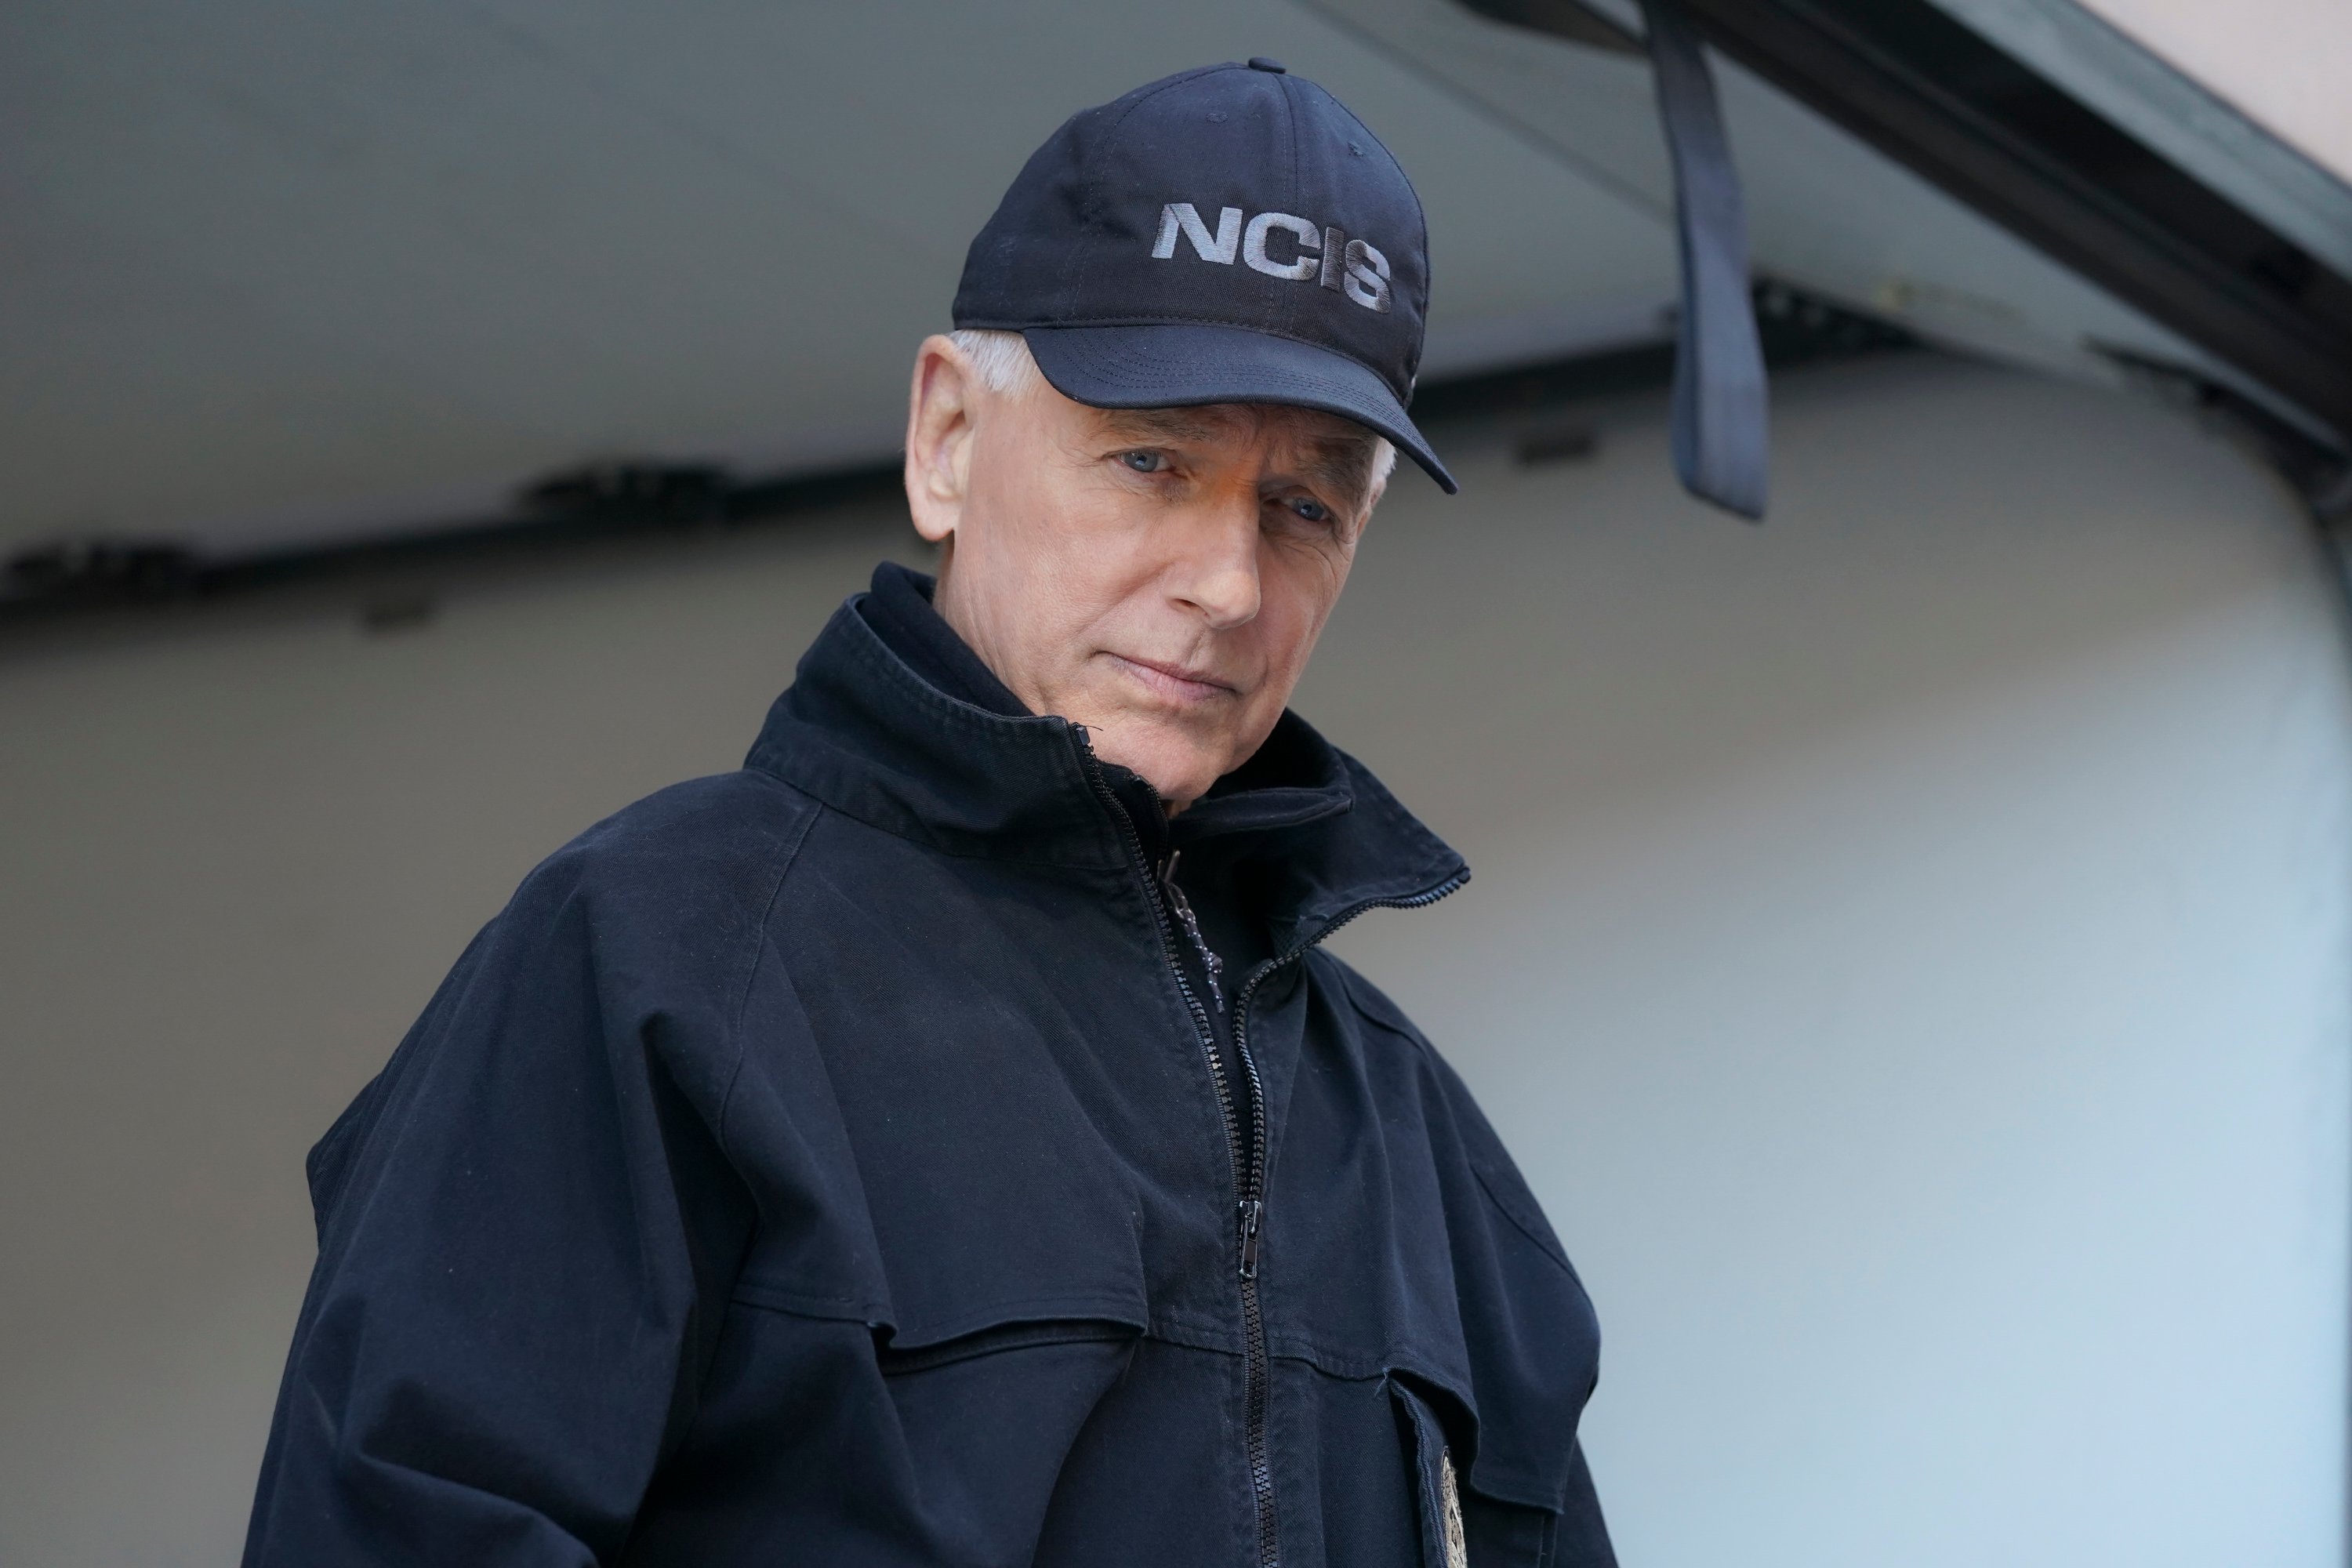 Mark Harmon poses in his NCIS hat in an episode that aired Tuesday, March 9 on CBS